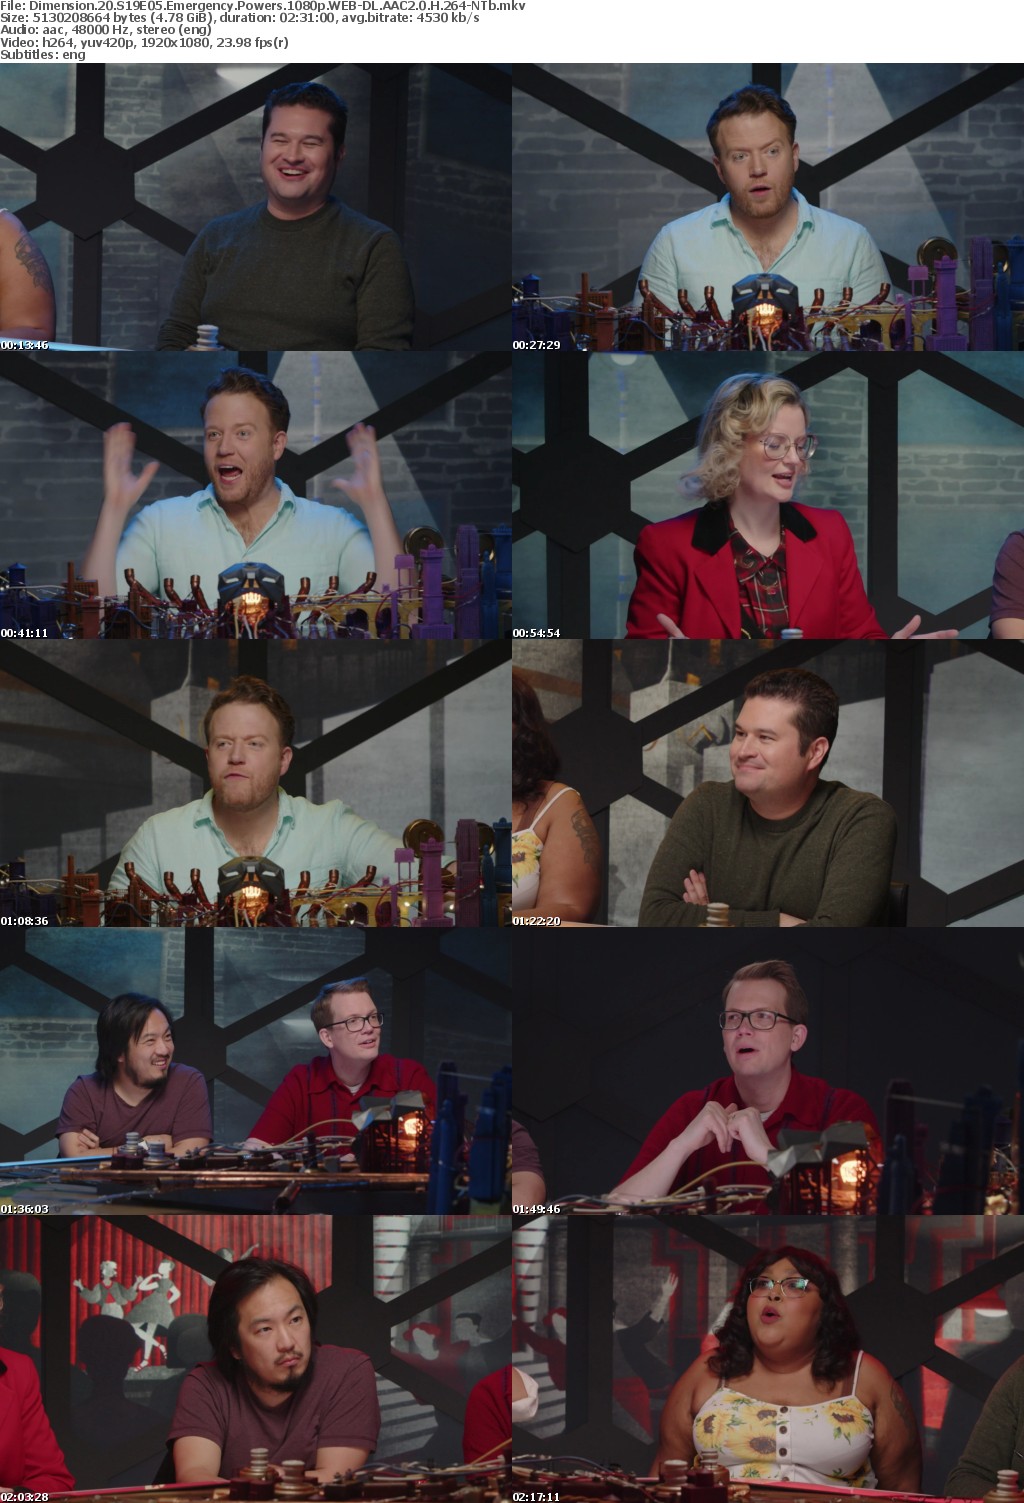 Dimension 20 S19E05 Emergency Powers 1080p WEB-DL AAC2 0 H 264-NTb